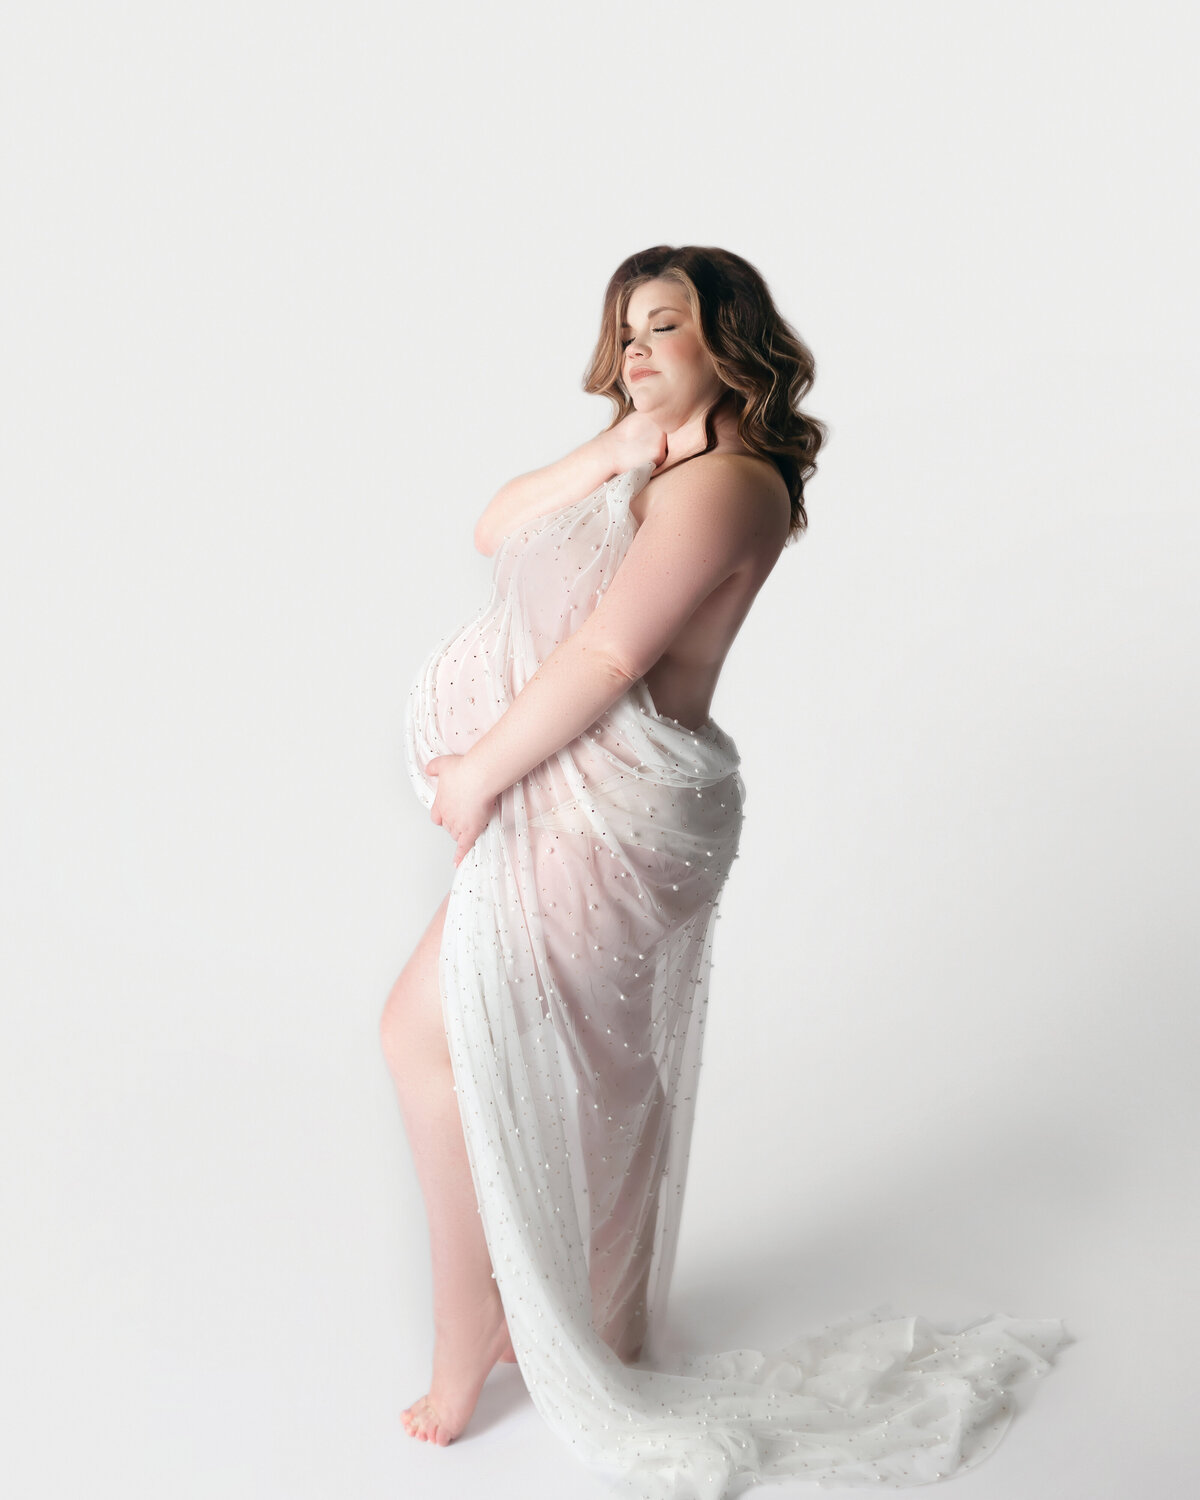 Pregnant women with white fabric draped over body during maternity photoshoot in Franklin Tennessee photography studio